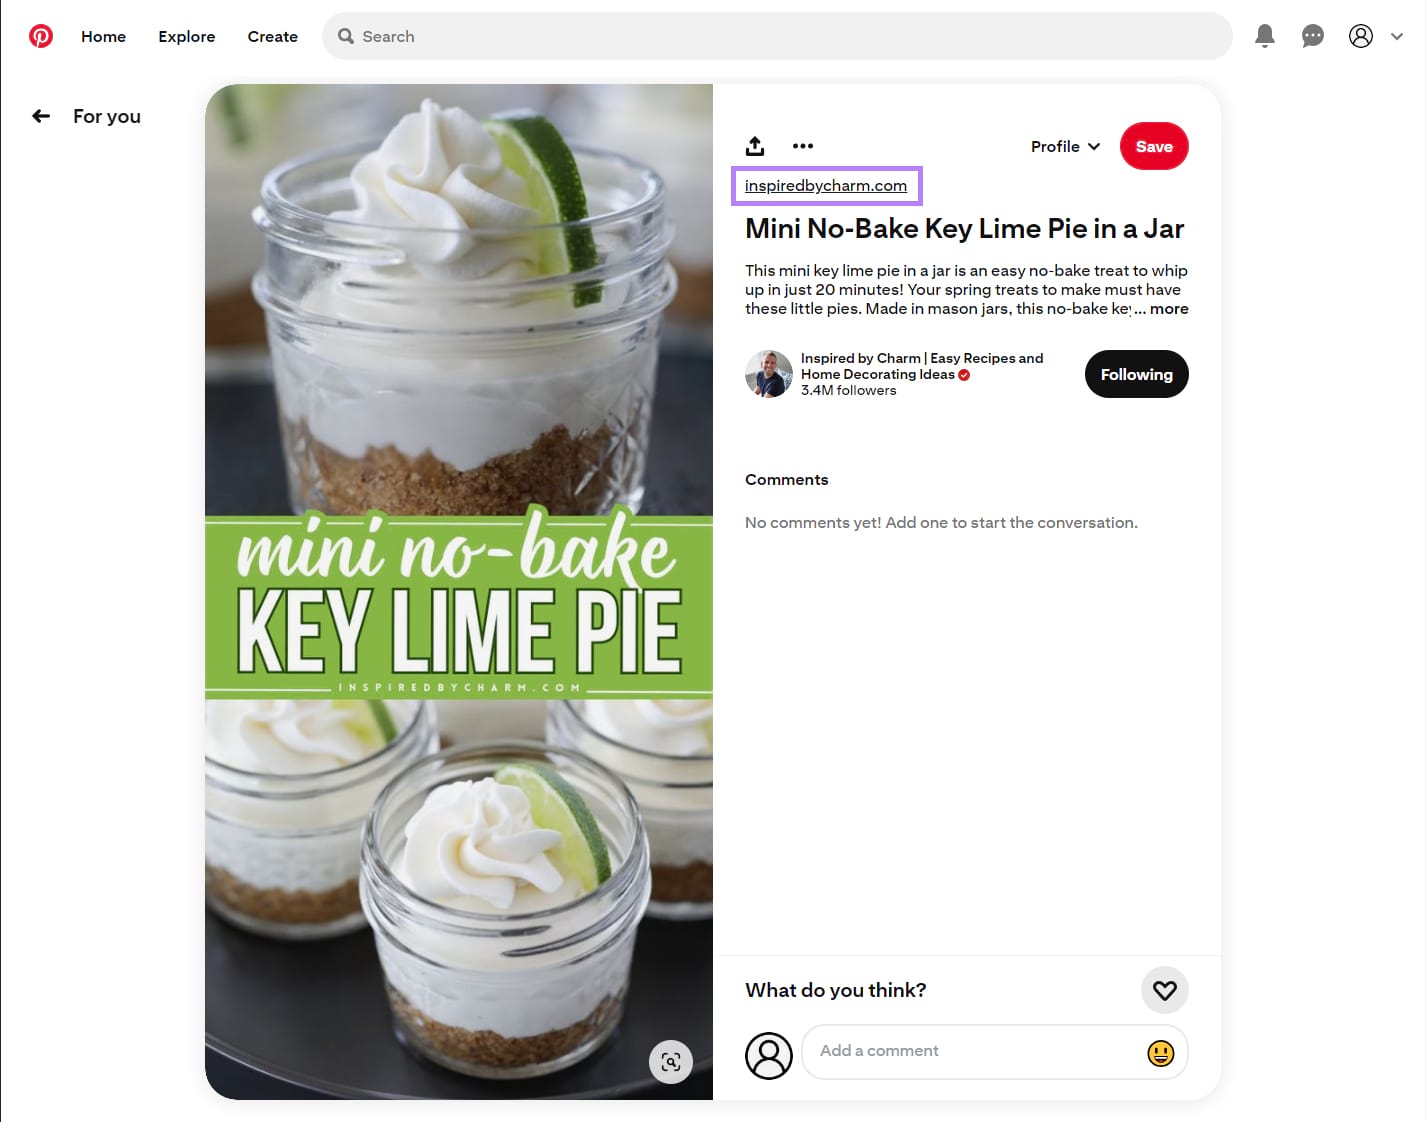 Pinterest Pin for a cardinal  lime pastry  look    showing the nexus  to the account's website.